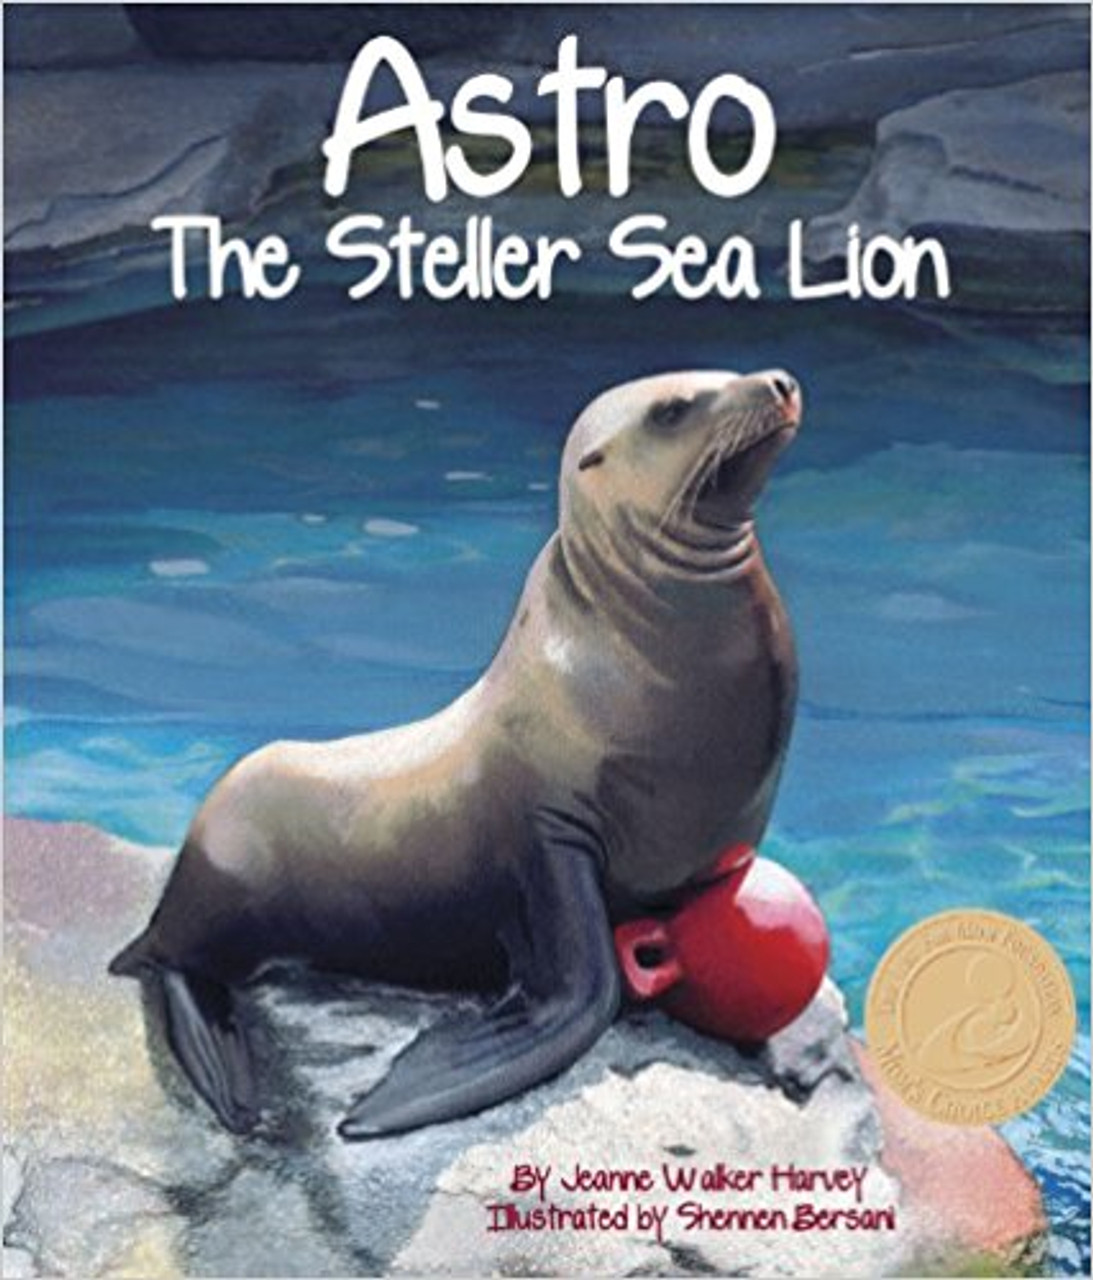 Astro is a stellar Steller sea lion!  Only a few days old when found orphaned, he is cared for and raised at The Marine Mammal Center in Sausalito, California.  When big enough to be released to the wild where he needs to be, he has other plans!  Just like a lost dog finding his way home, Astro keeps swimming back towards the Center, crossing miles of open ocean water to do so. After several attempts, people realize that Astro is too accustomed to humans and will just keep coming back. Based on real events, readers follow Astro through some of his travels that have now taken him across the U.S. to his current home at the Mystic Aquarium in Connecticut.